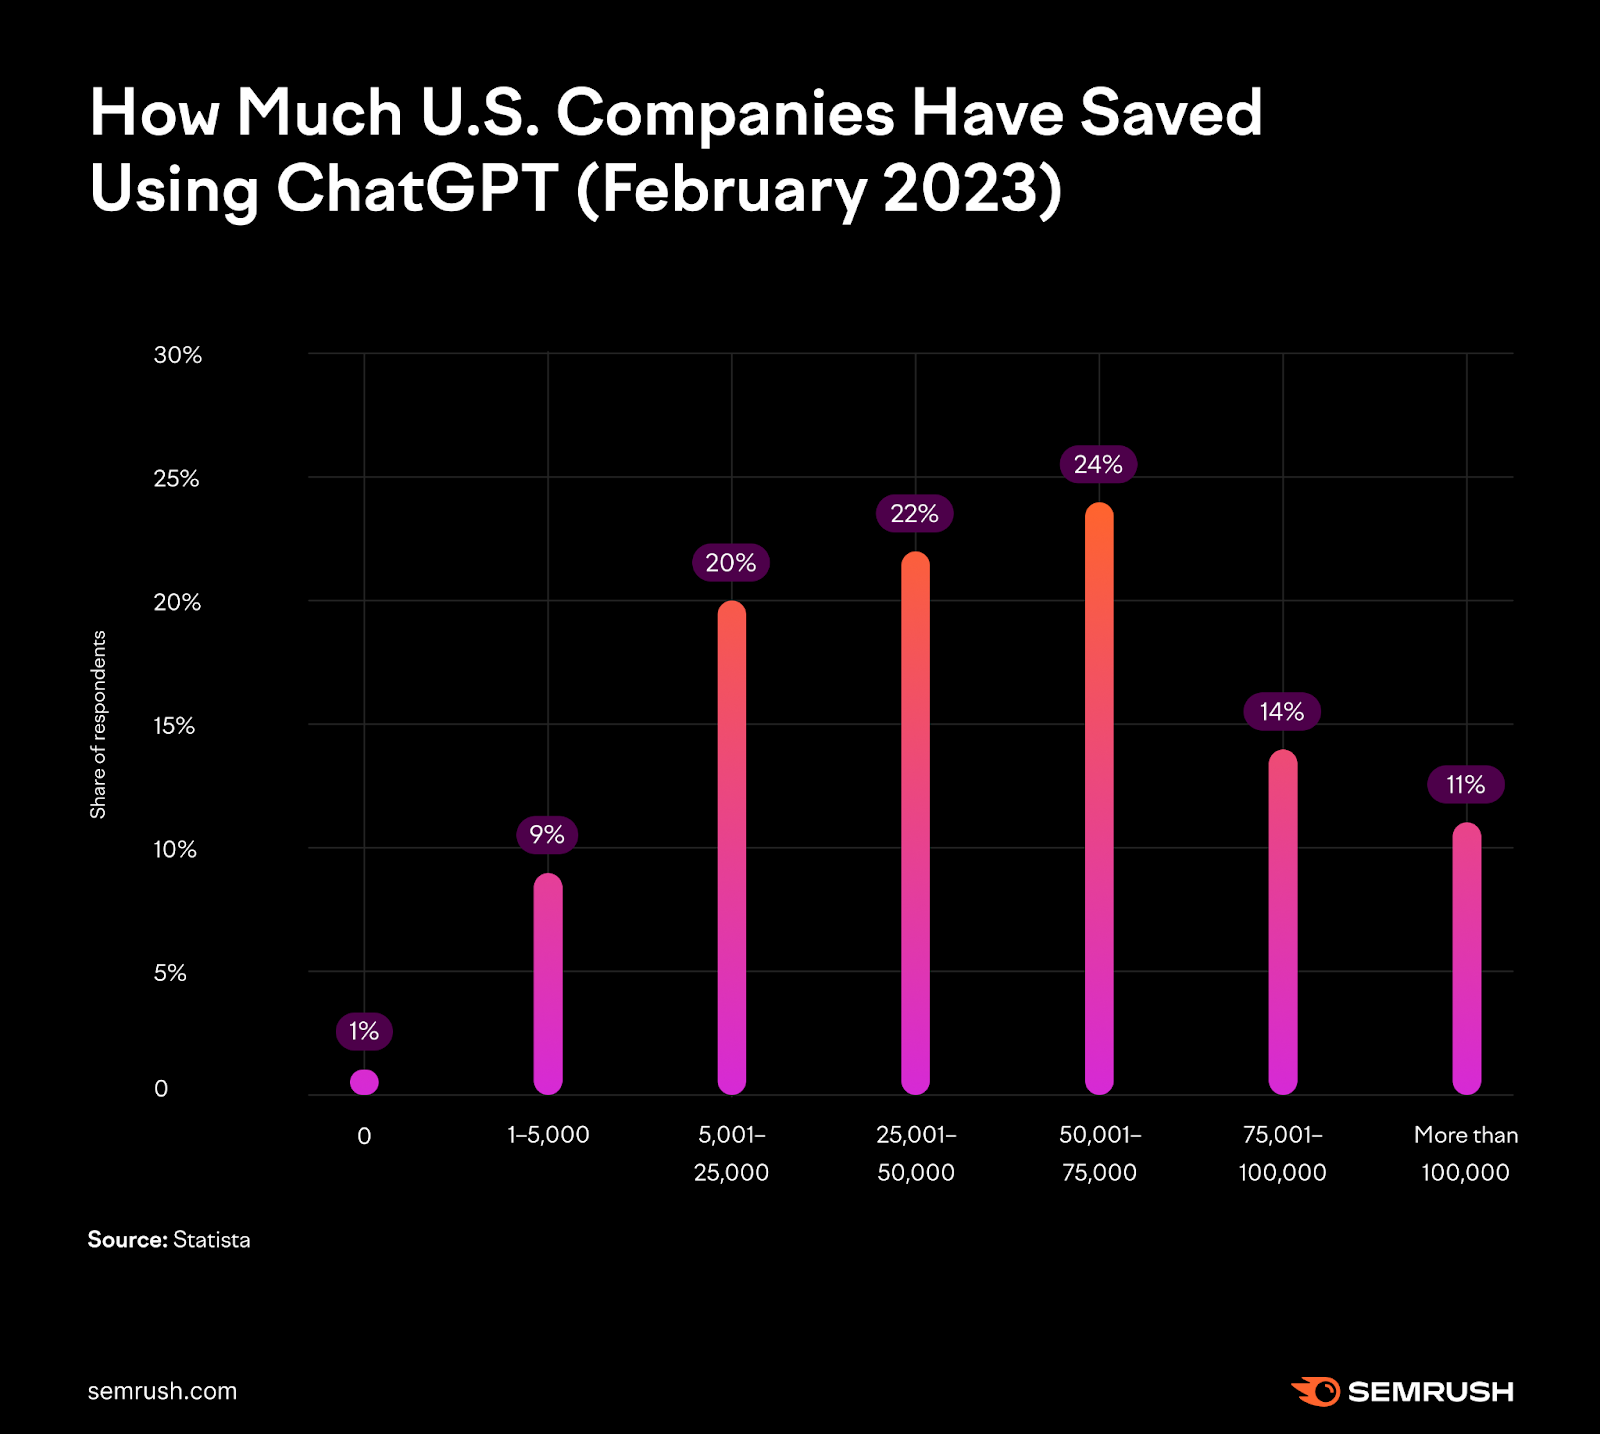 A graph from Statista data, showing how much U.S. companies have saved using ChatGPT in February 2023